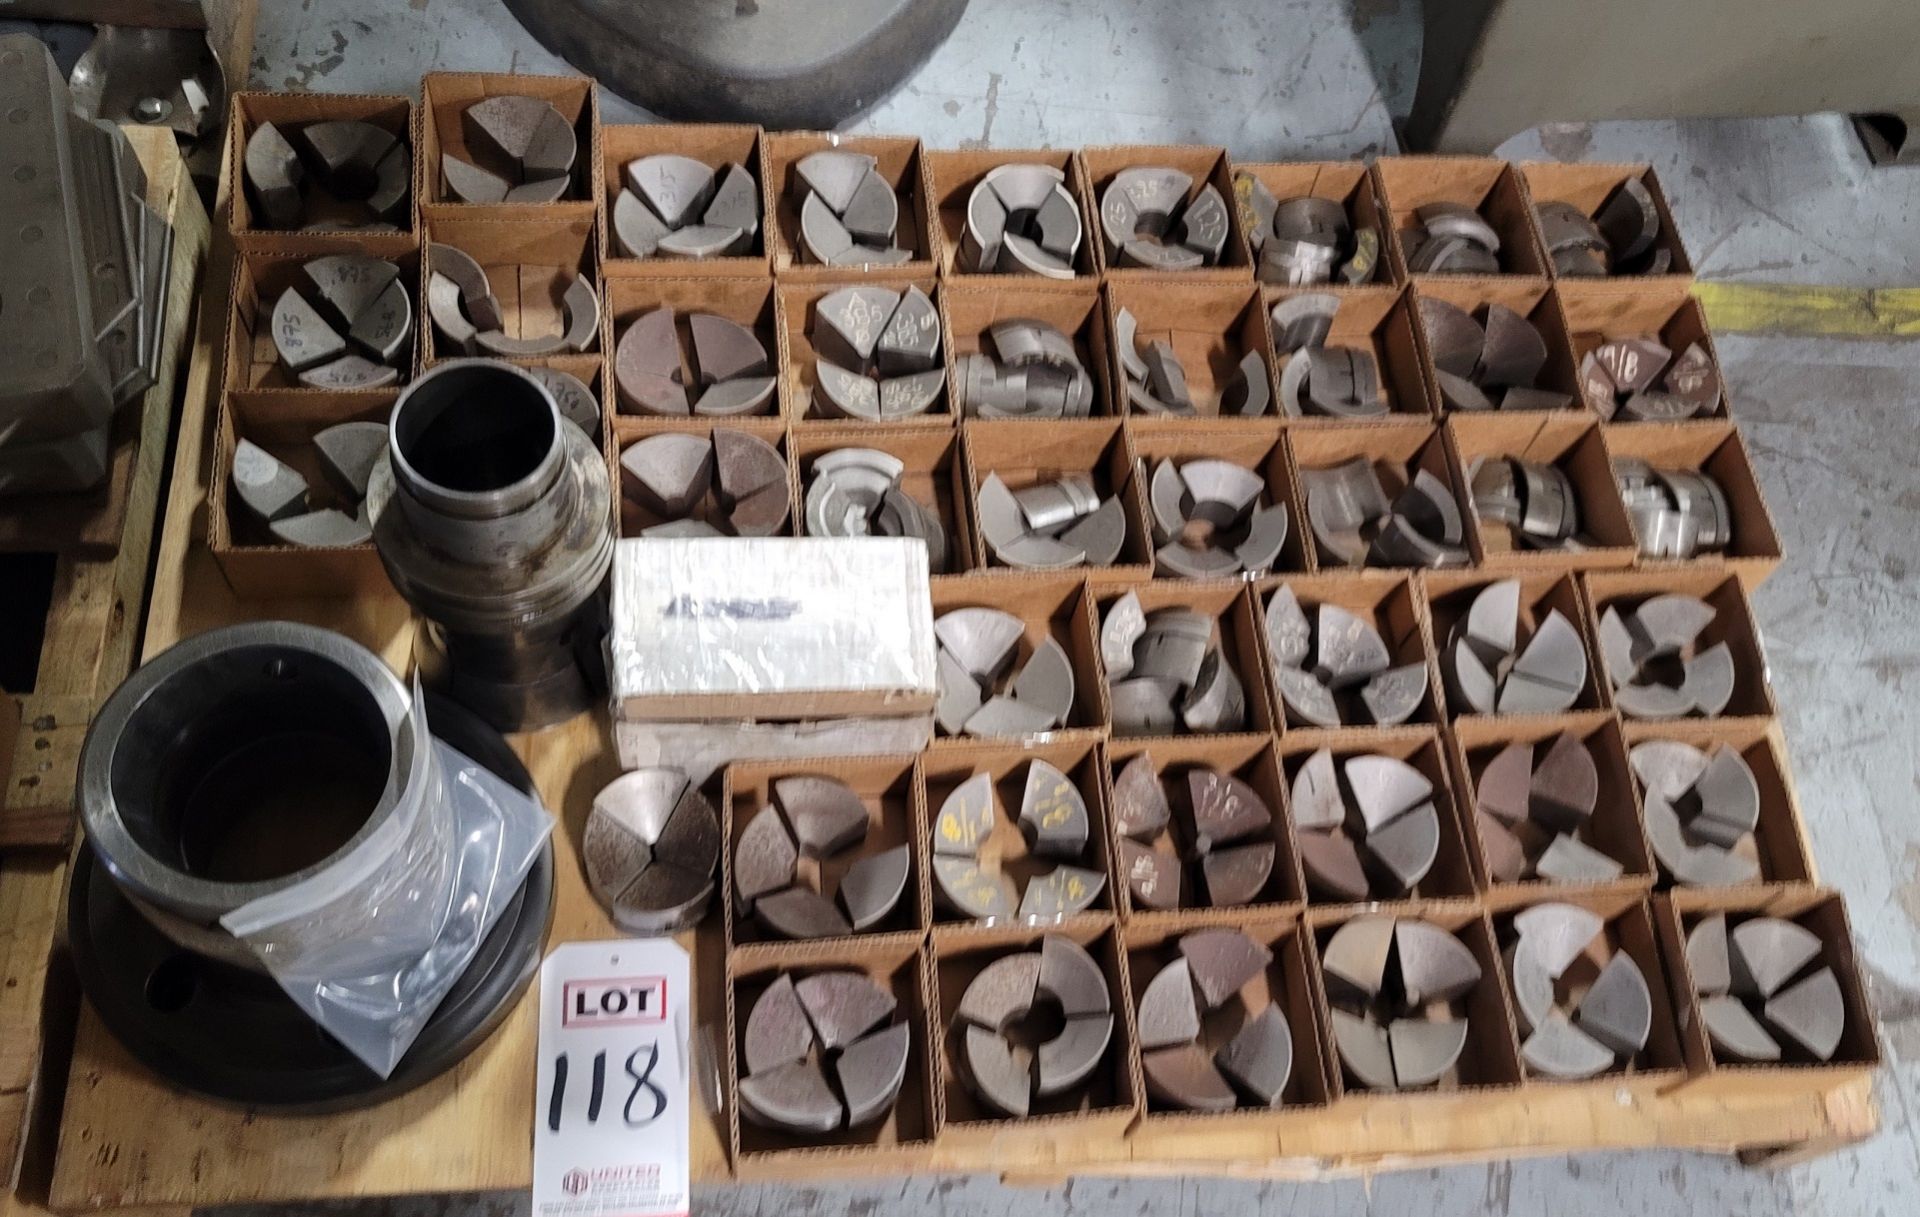 LOT - ATS COLLET NOSE W/ HOLDER AND (15) SETS OF 3" COLLETS, **IMMEX REGISTERED EQUIPMENT (NEEDS